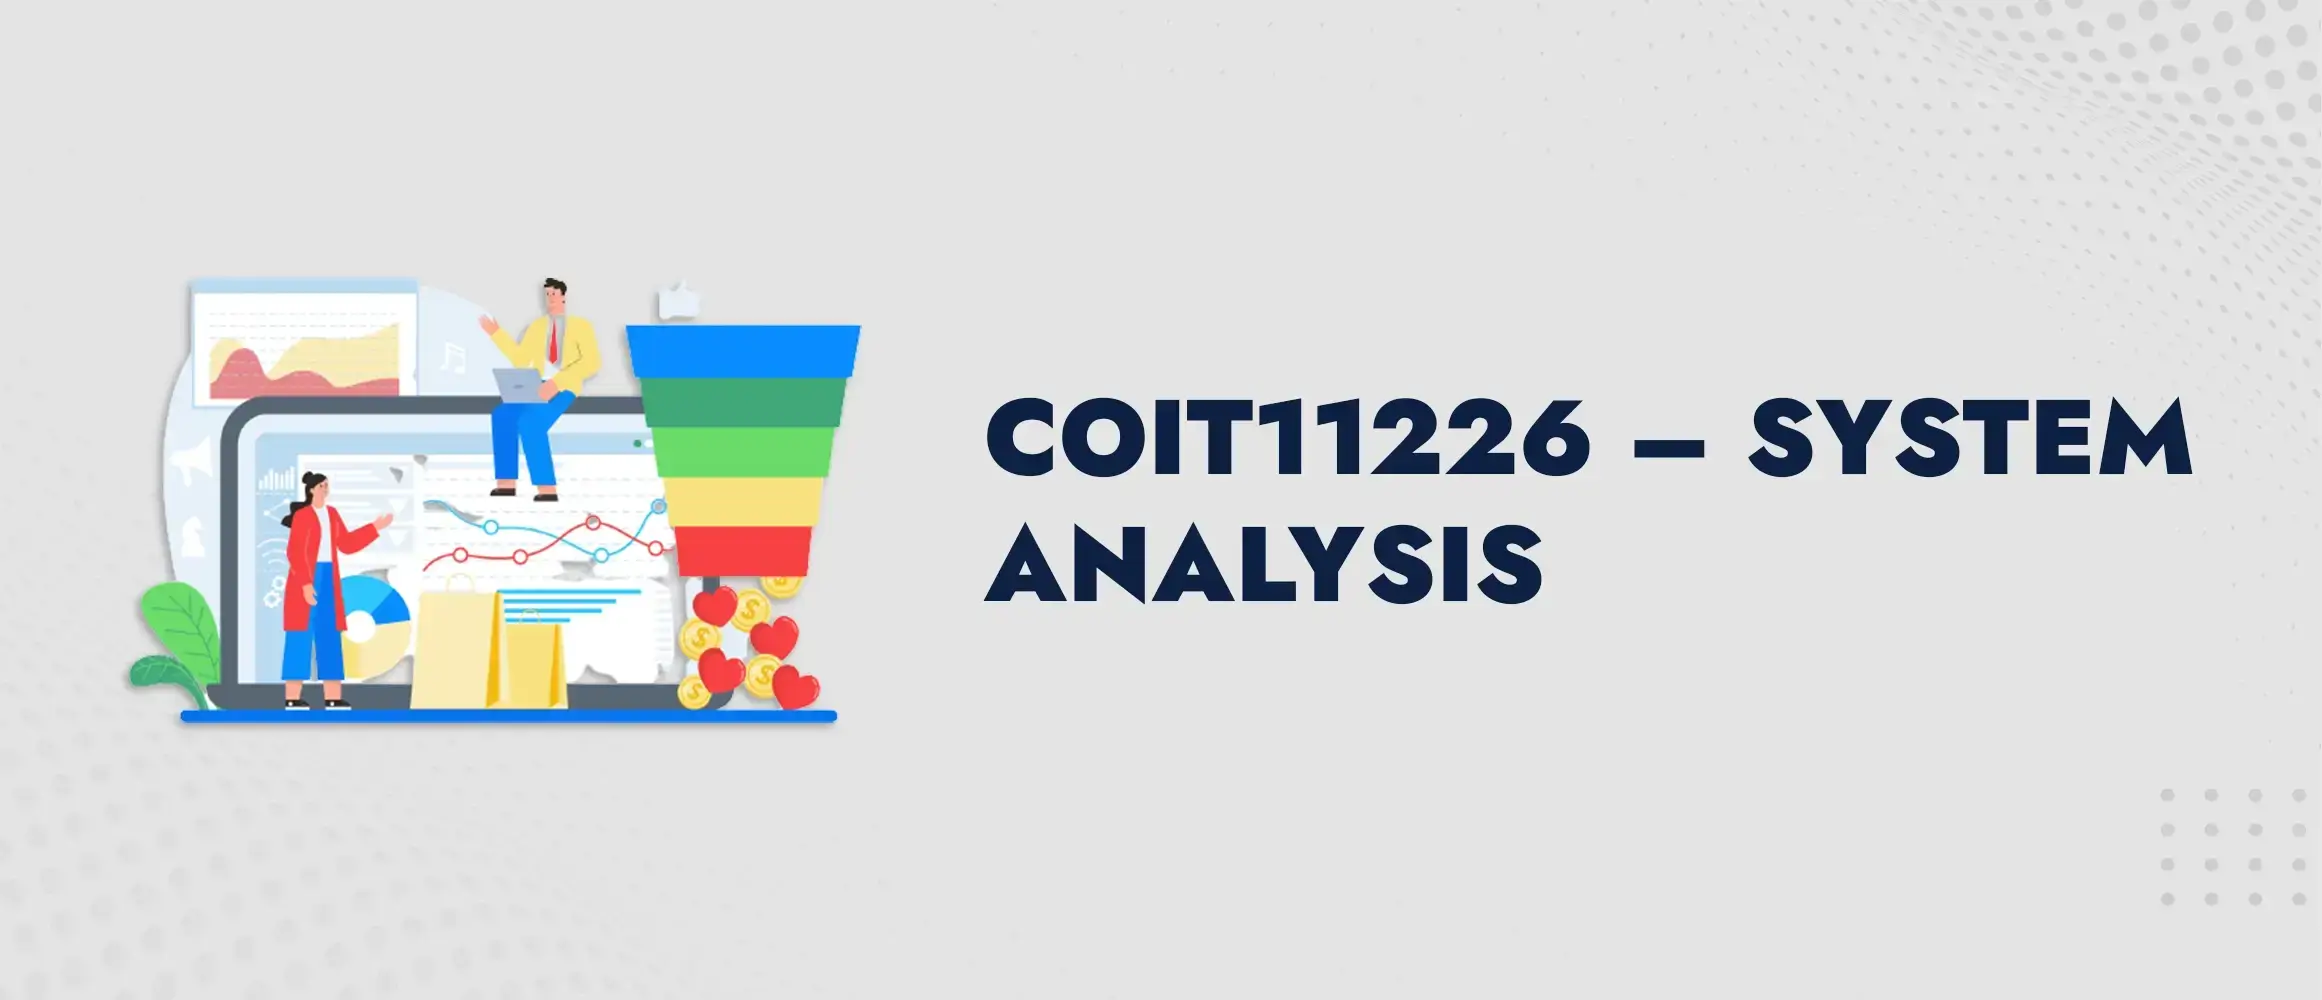 COIT11226 System Analysis